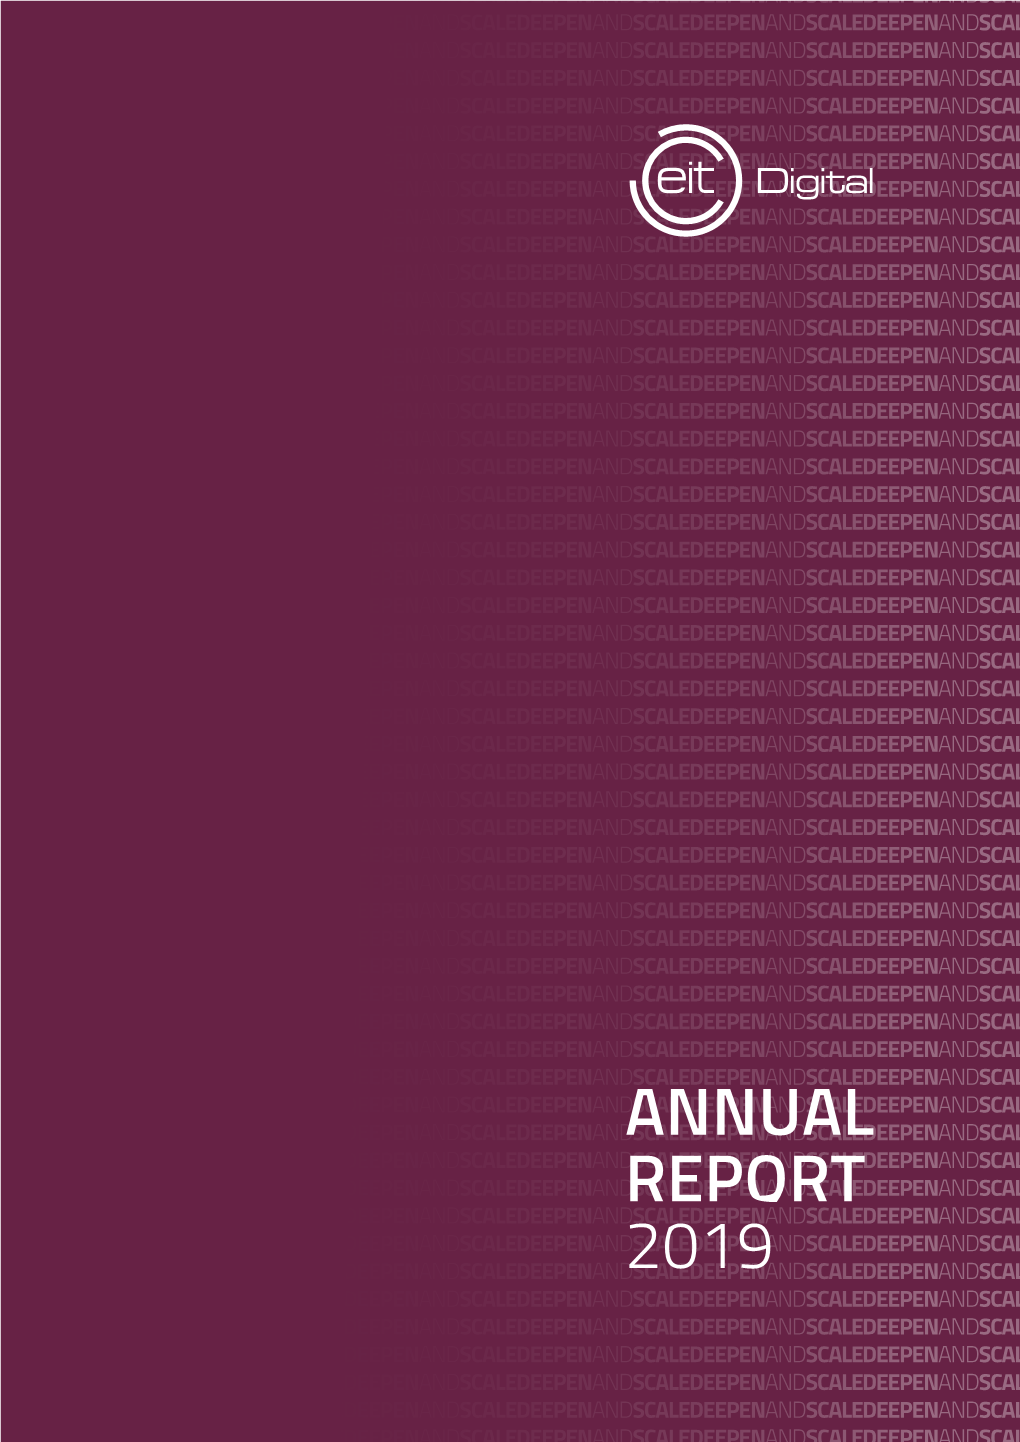 Annual Report 2019 Contents